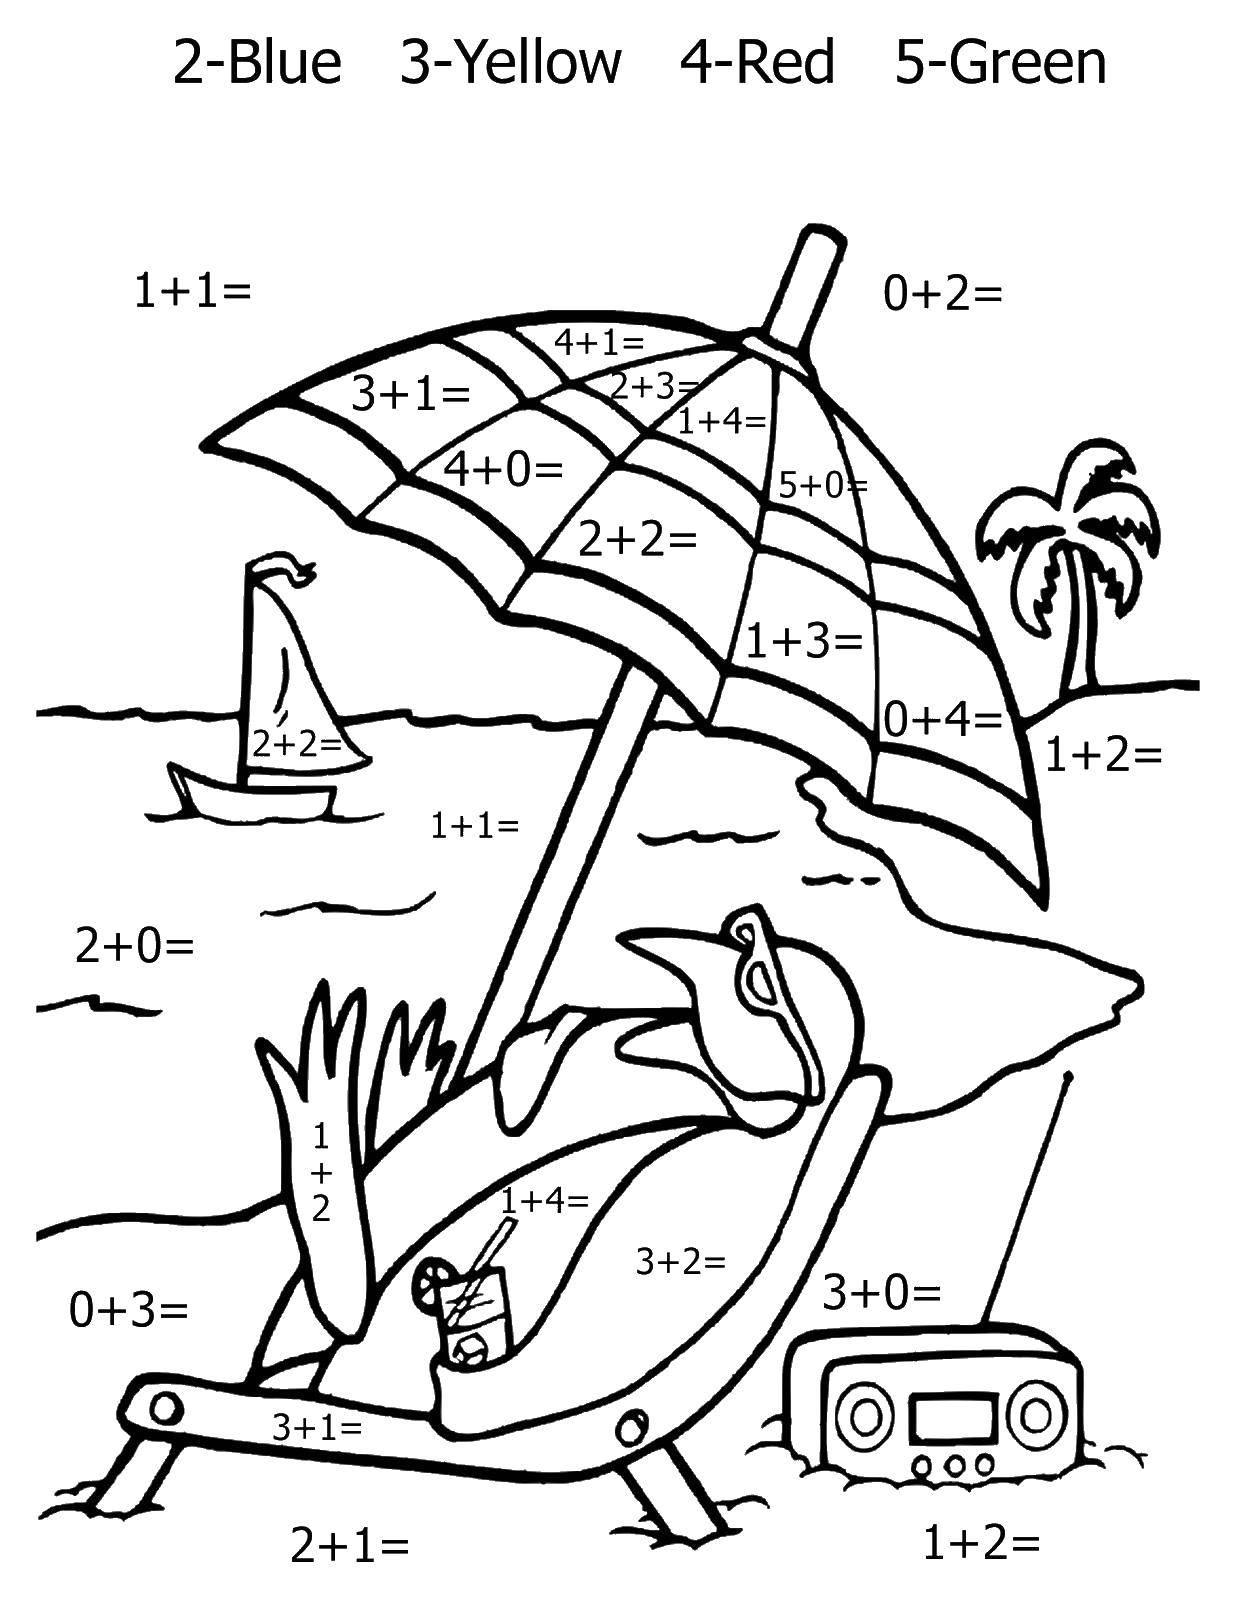 Coloring Penguin on the beach. Category mathematical coloring pages. Tags:  the penguin math coloring.